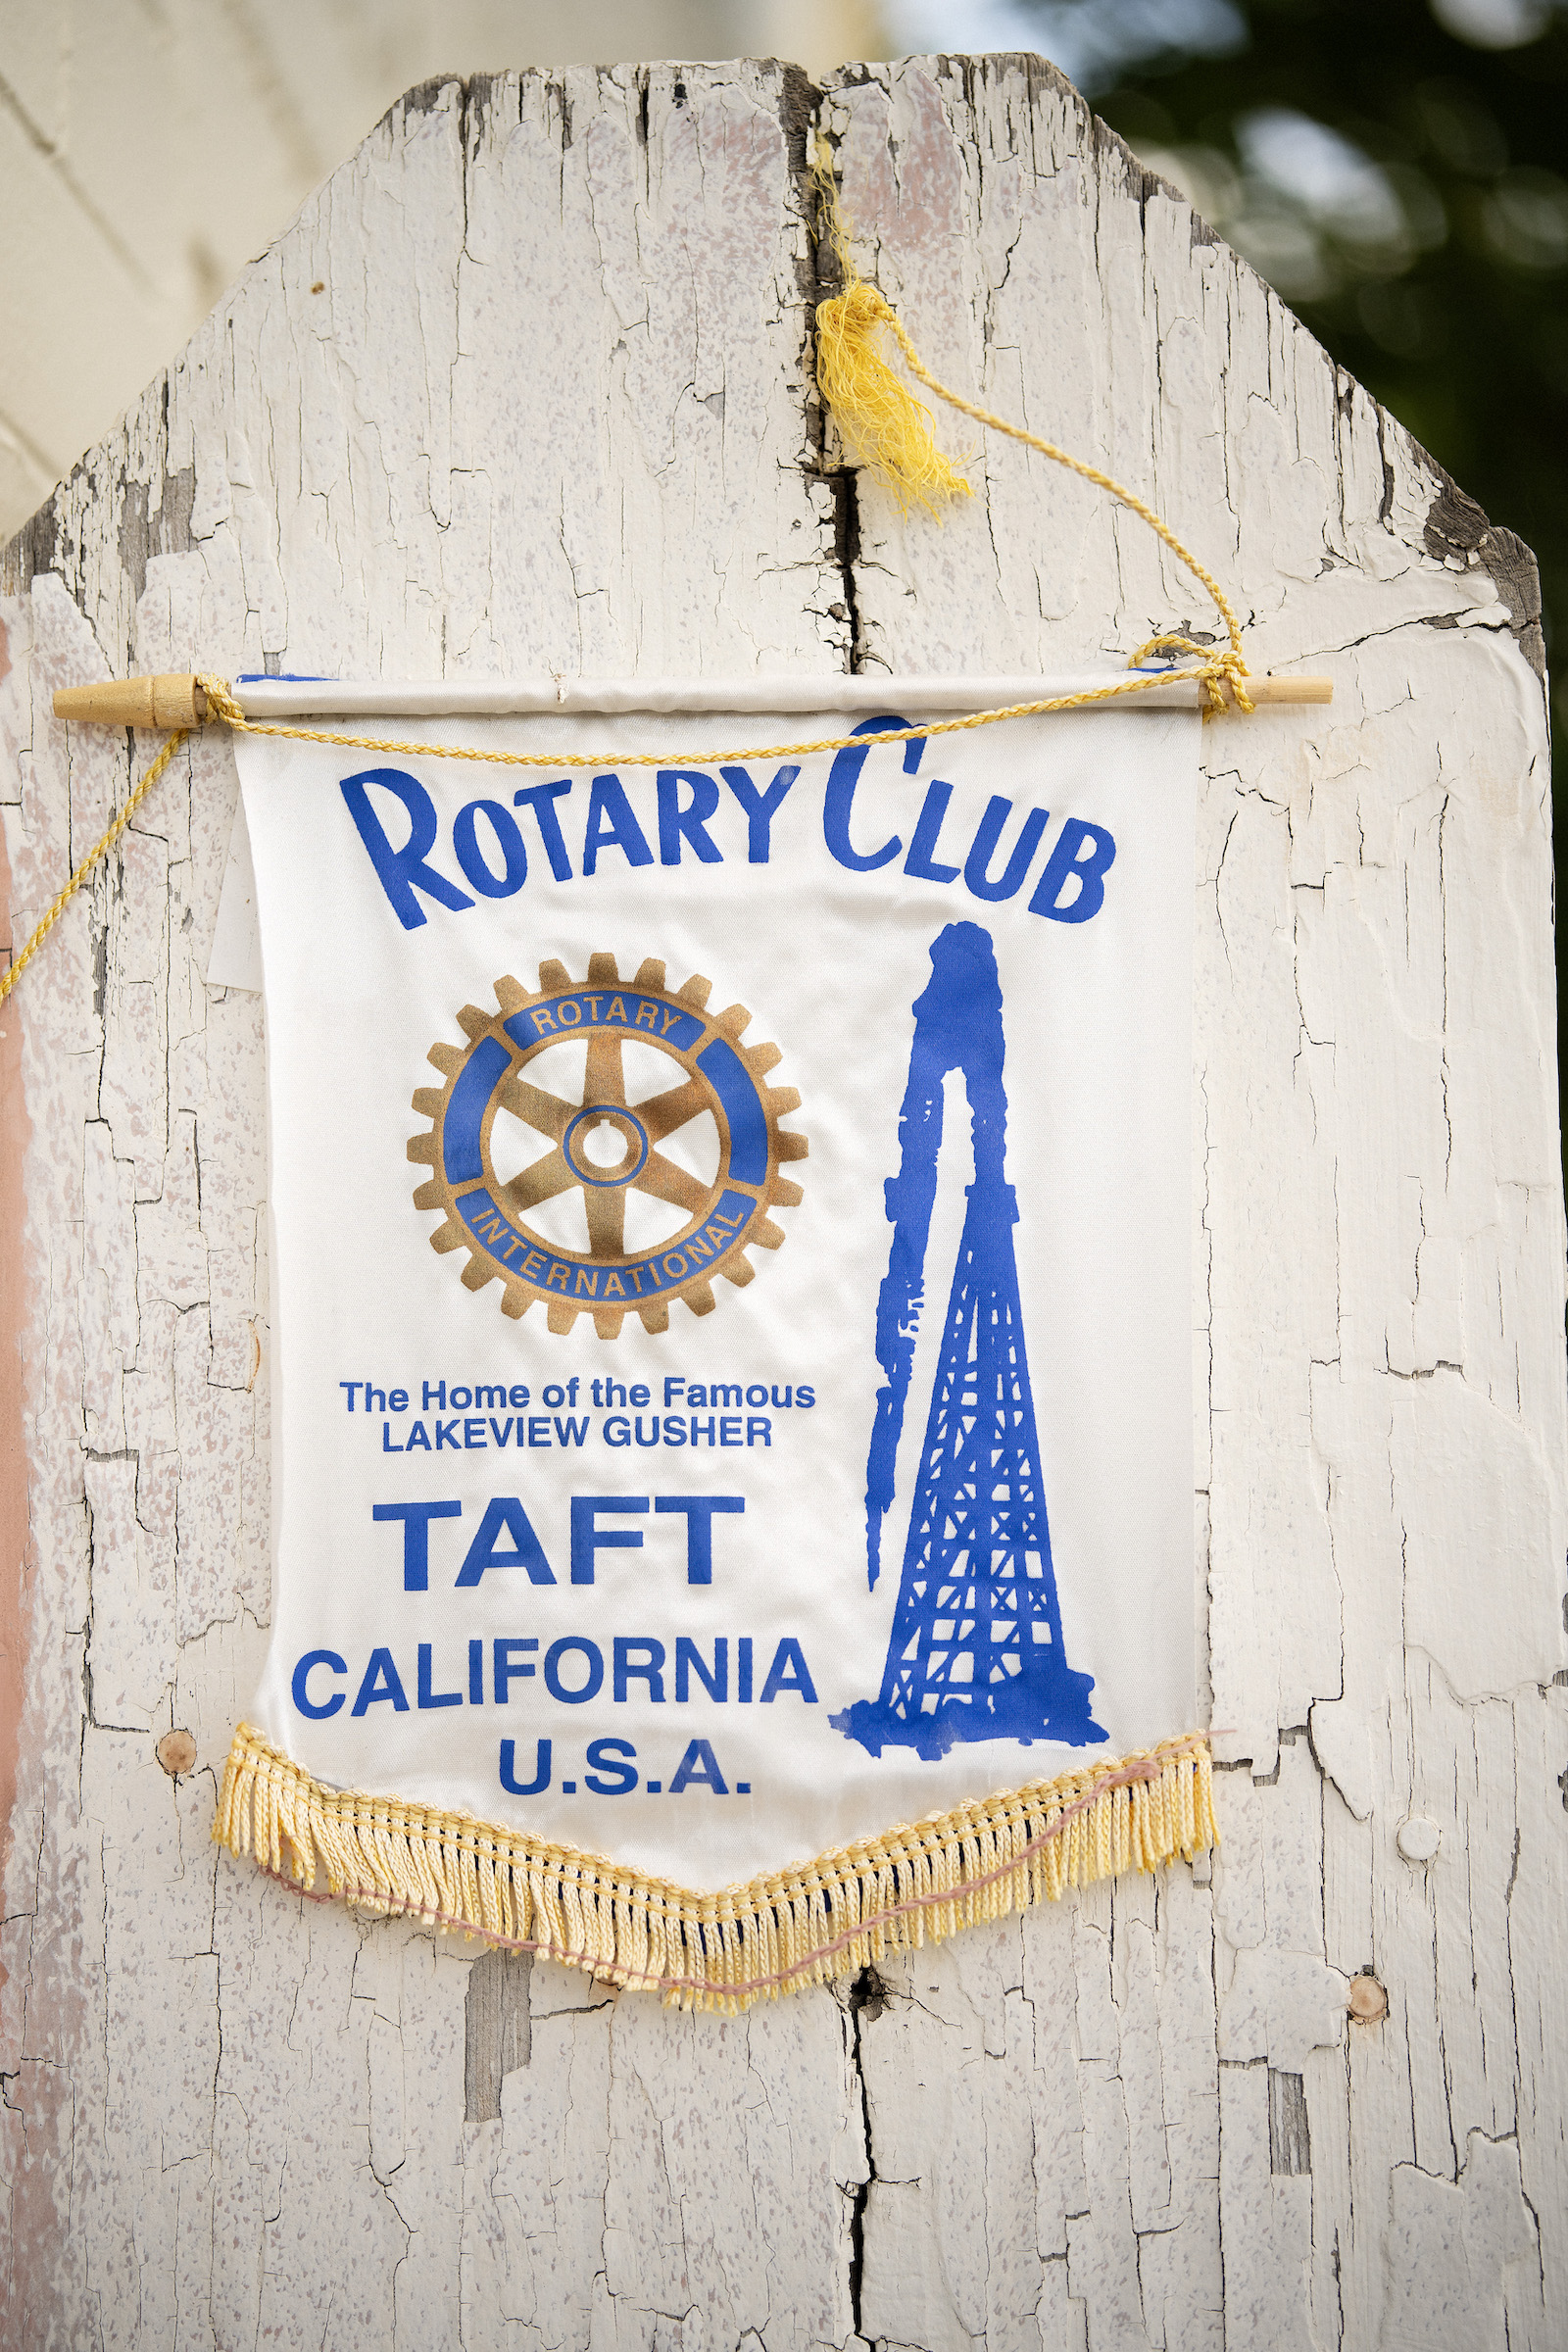 A flag for the rotary club of Taft with an oil tower on it